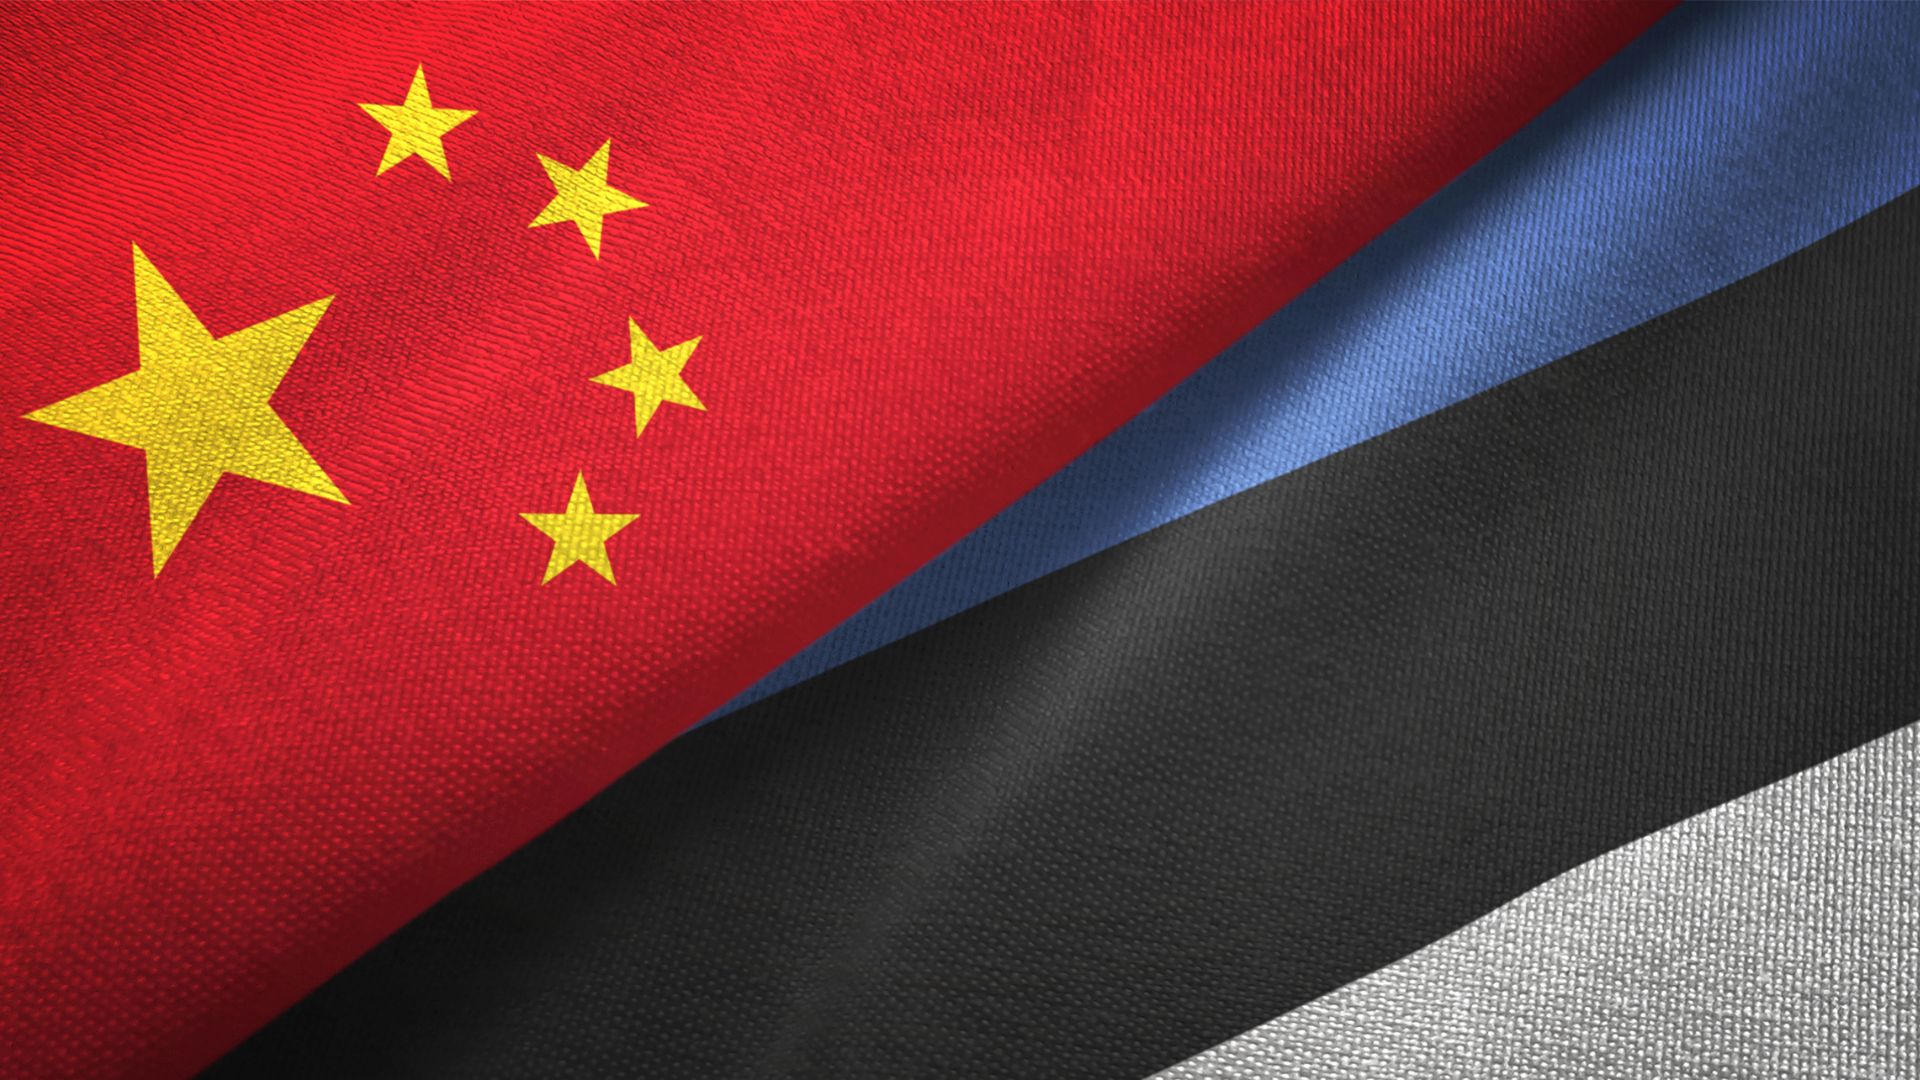 Estonian and Chinese flags